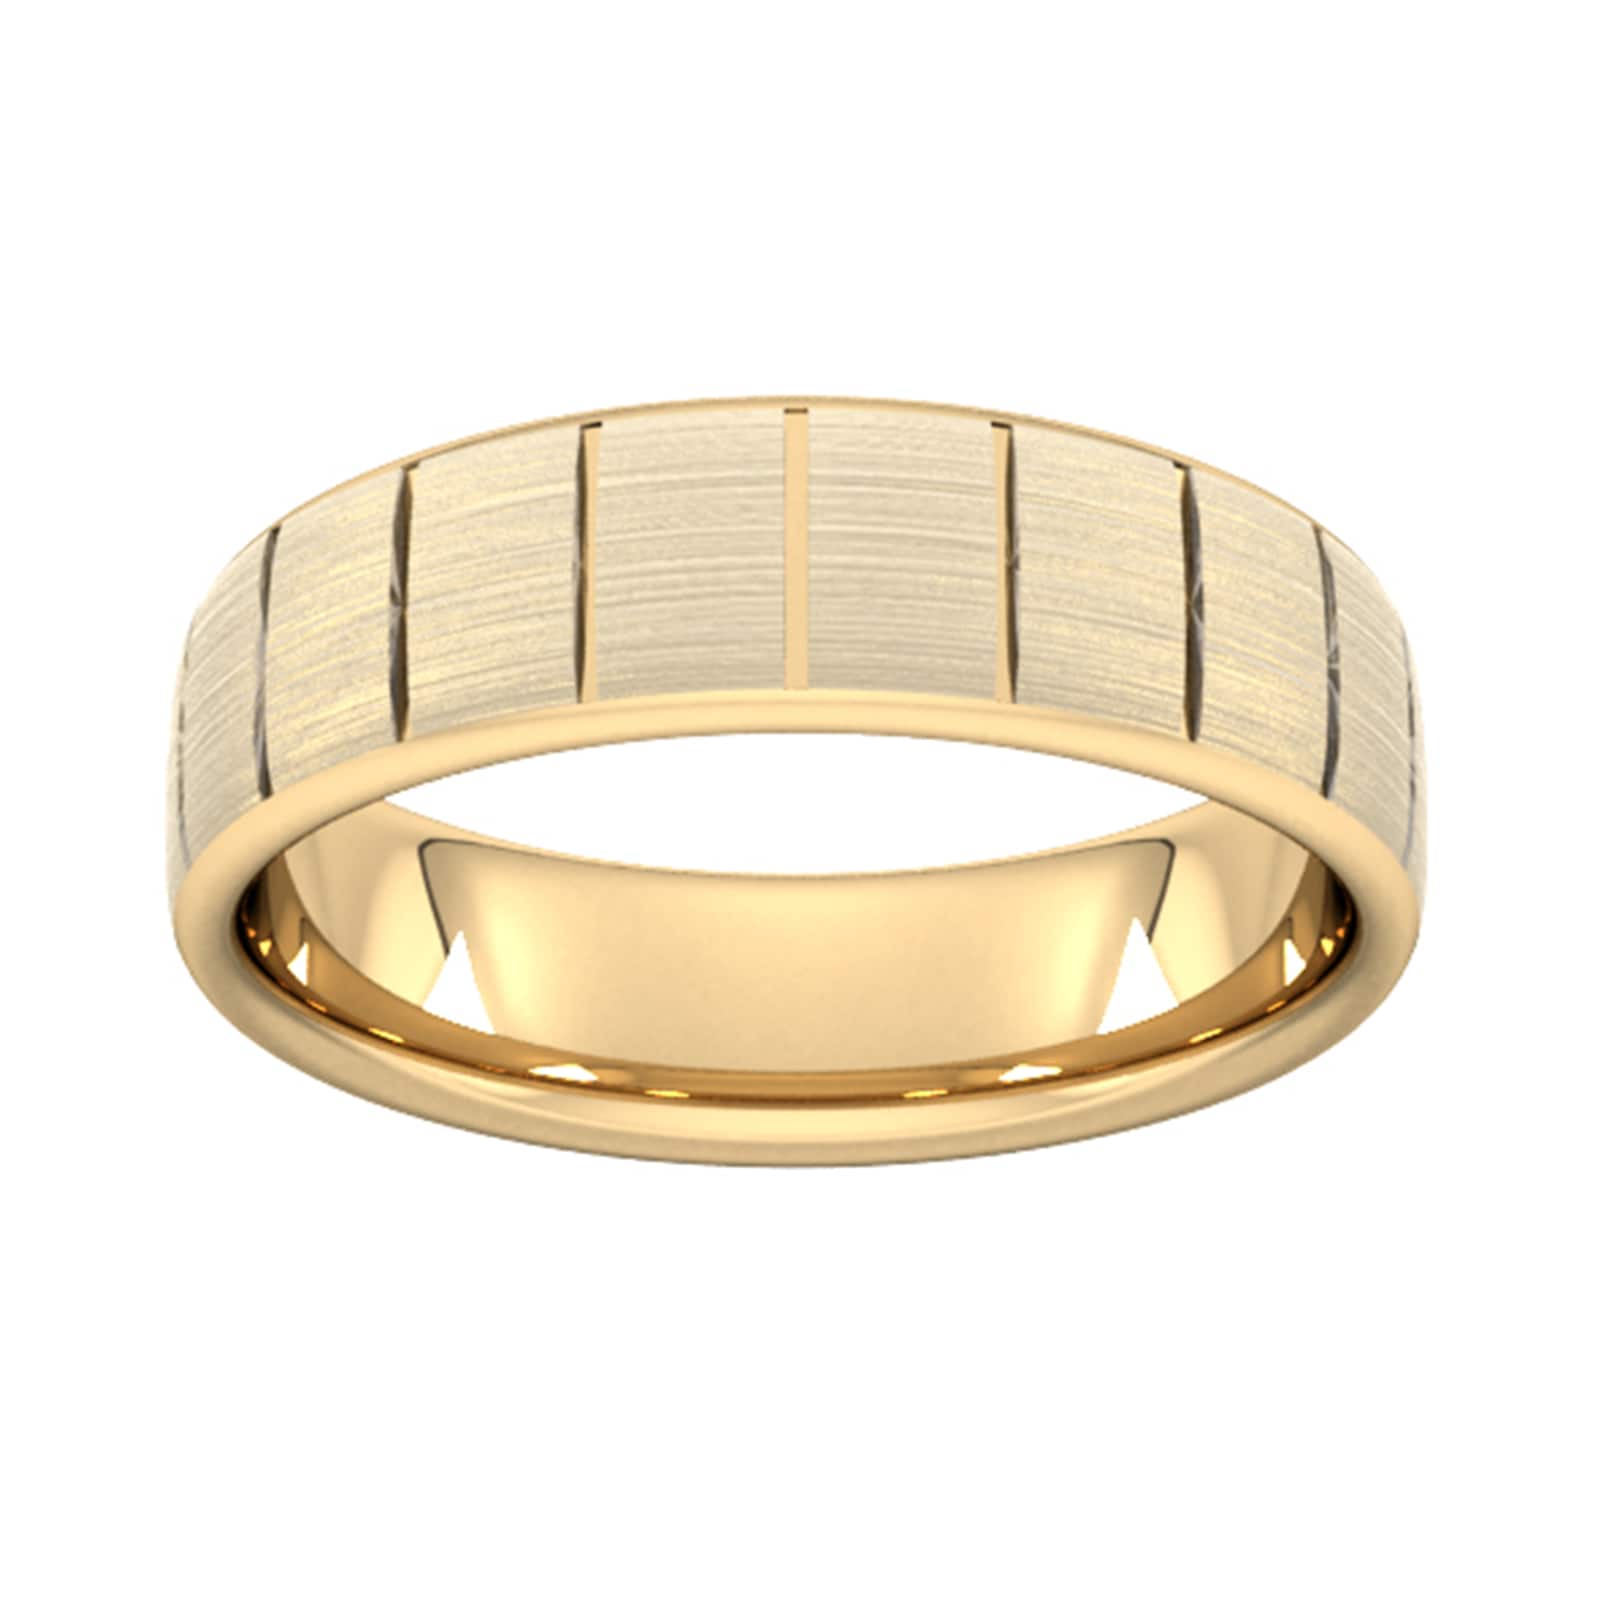 6mm Slight Court Heavy Vertical Lines Wedding Ring In 18 Carat Yellow Gold - Ring Size L